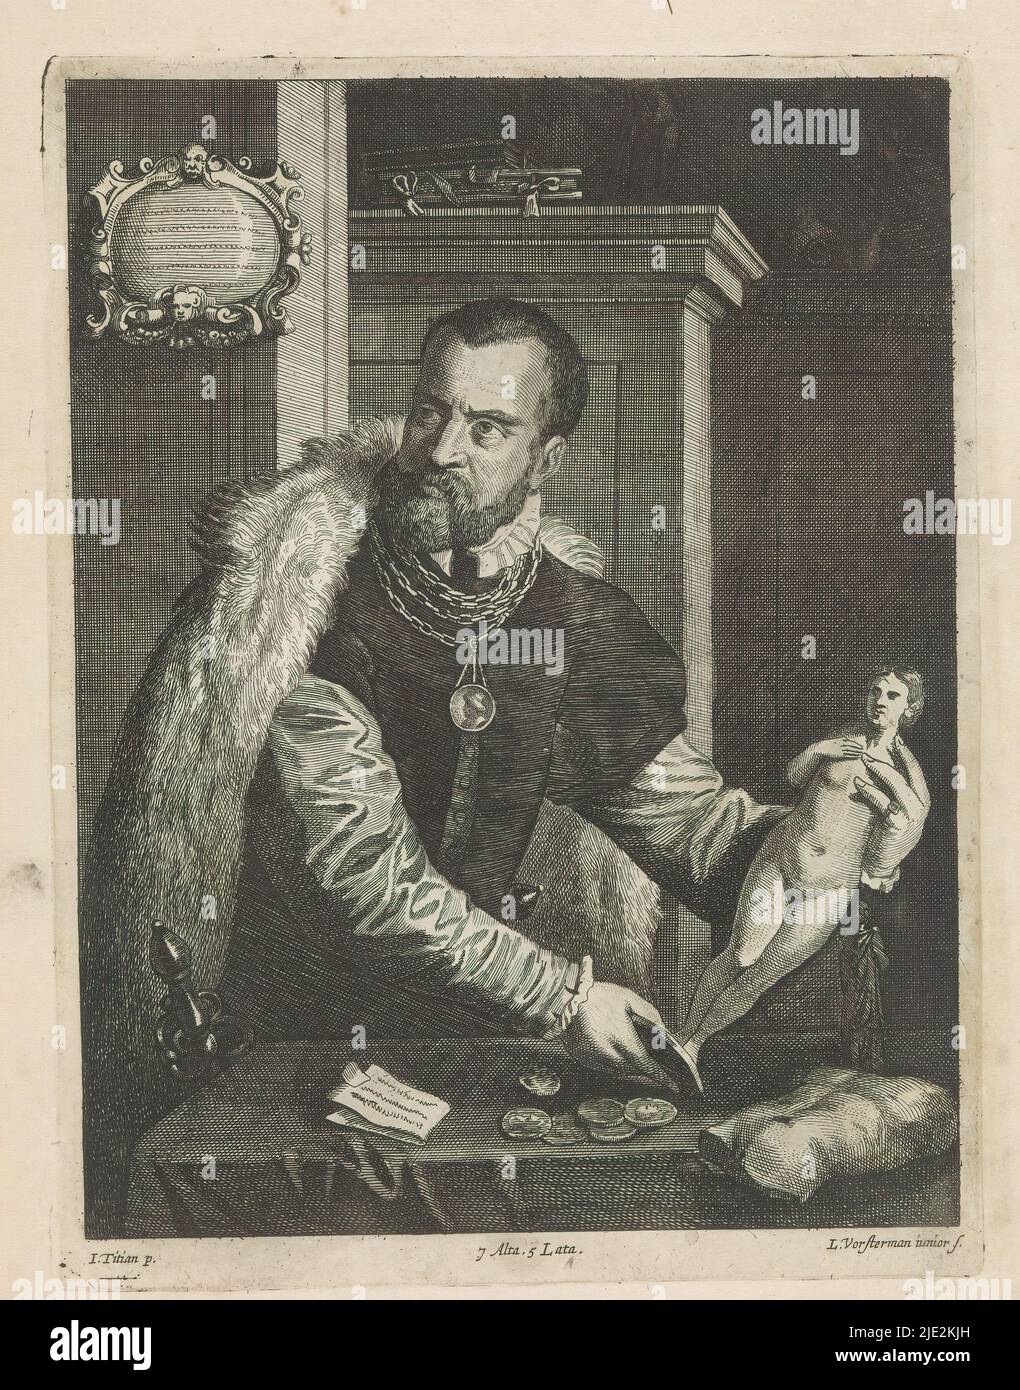 Portrait of Jacopo Strada, He is wearing a cape of fur and holding a statue. He is standing by a table in an interior. On the table are medals and statues. Above a cartouche. This print is part of an album., print maker: Lucas Vorsterman (II), (mentioned on object), after painting by: Titiaan, (mentioned on object), publisher: David Teniers (II), print maker: Southern Netherlands, after painting by: Italy, publisher: Brussels, 1660, paper, etching, engraving, height 232 mm × width 175 mm Stock Photo